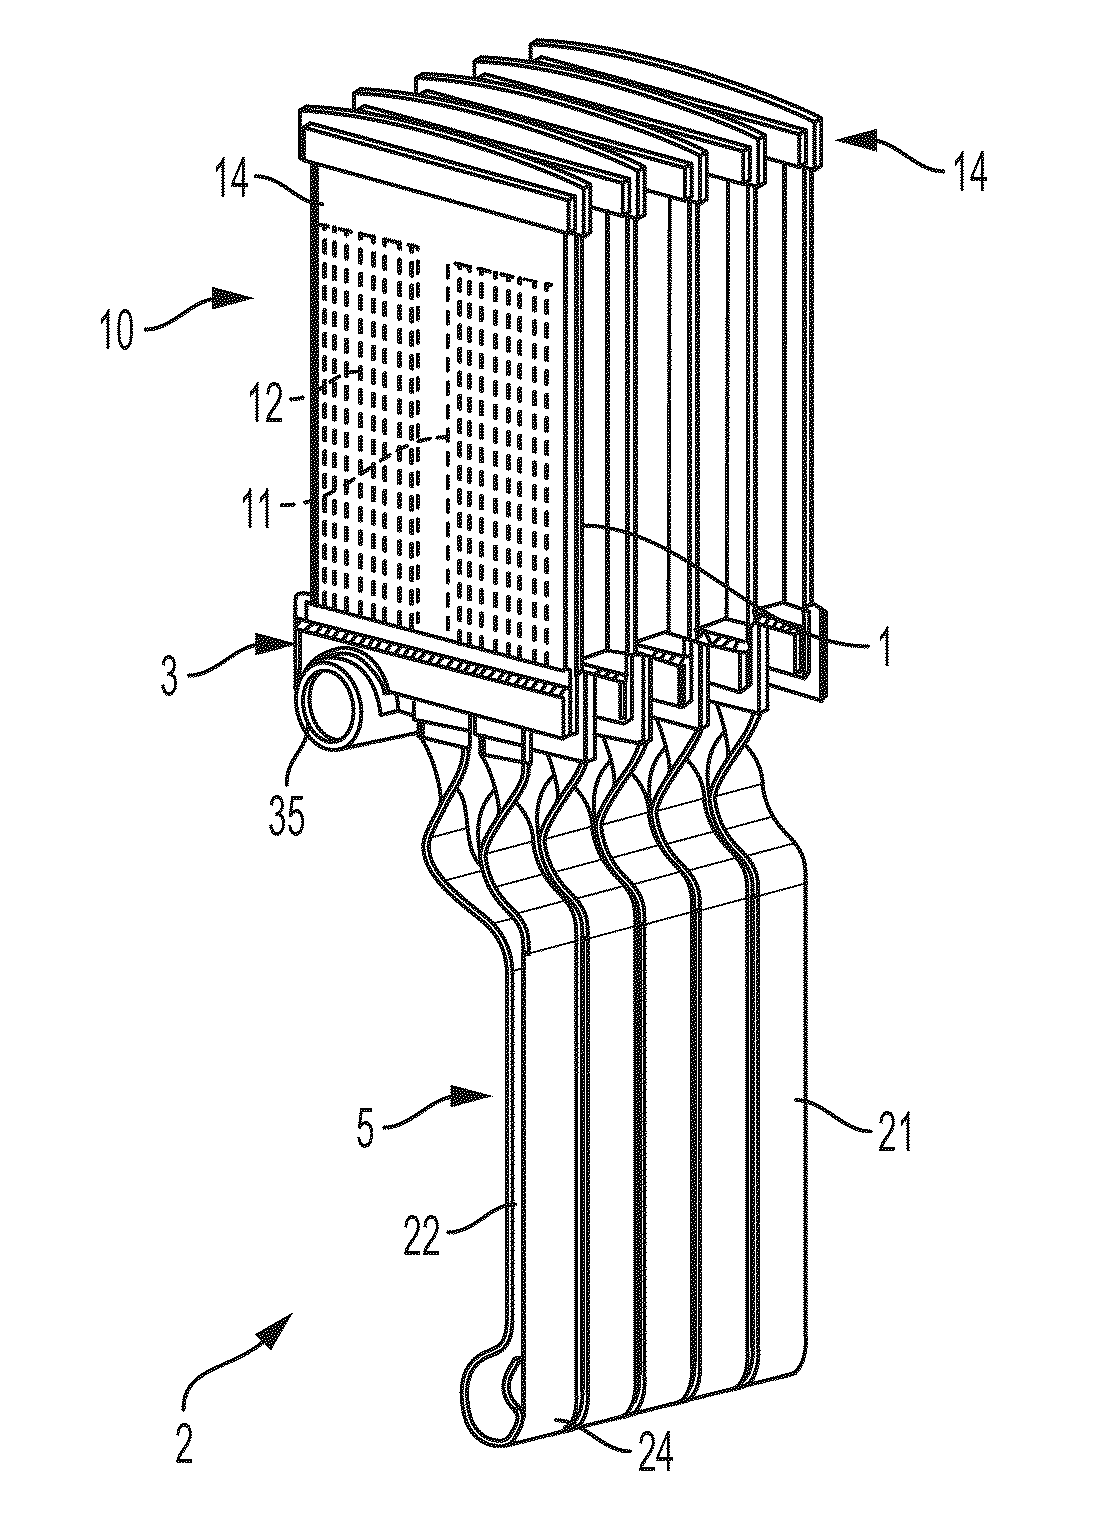 Evaporator and condenser section structure for thermosiphon